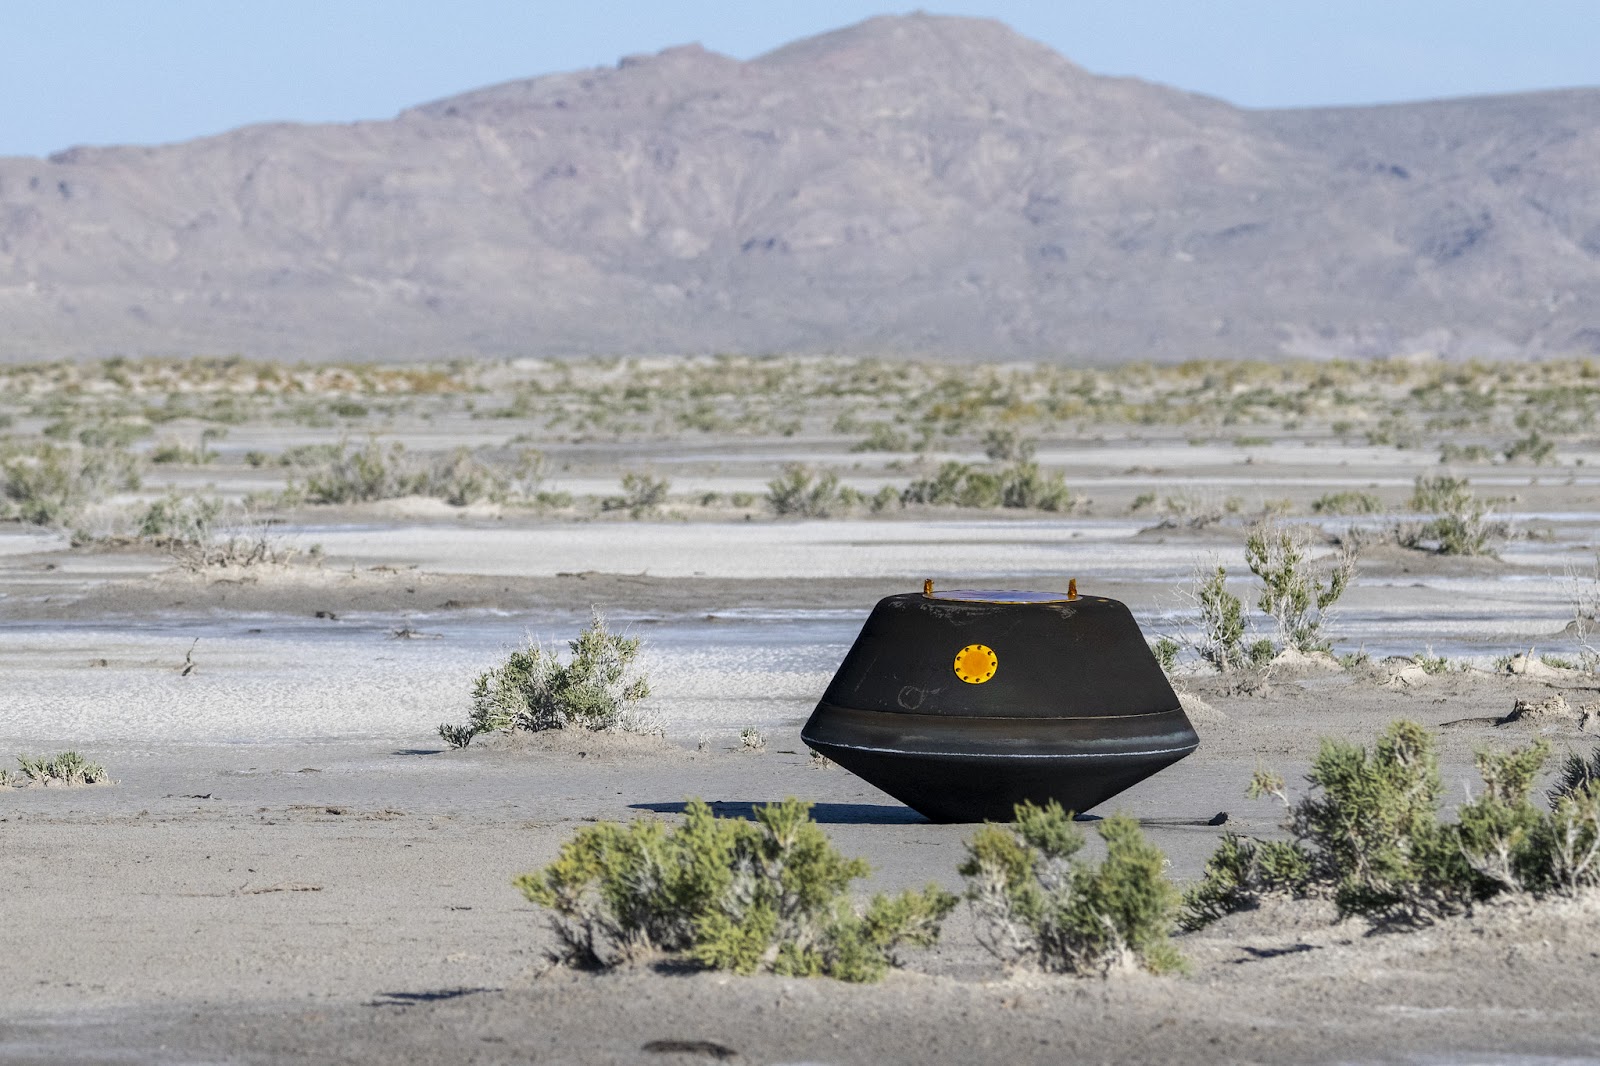 The sample return capsule from the OSIRIS-REx mission in the middle of the desert